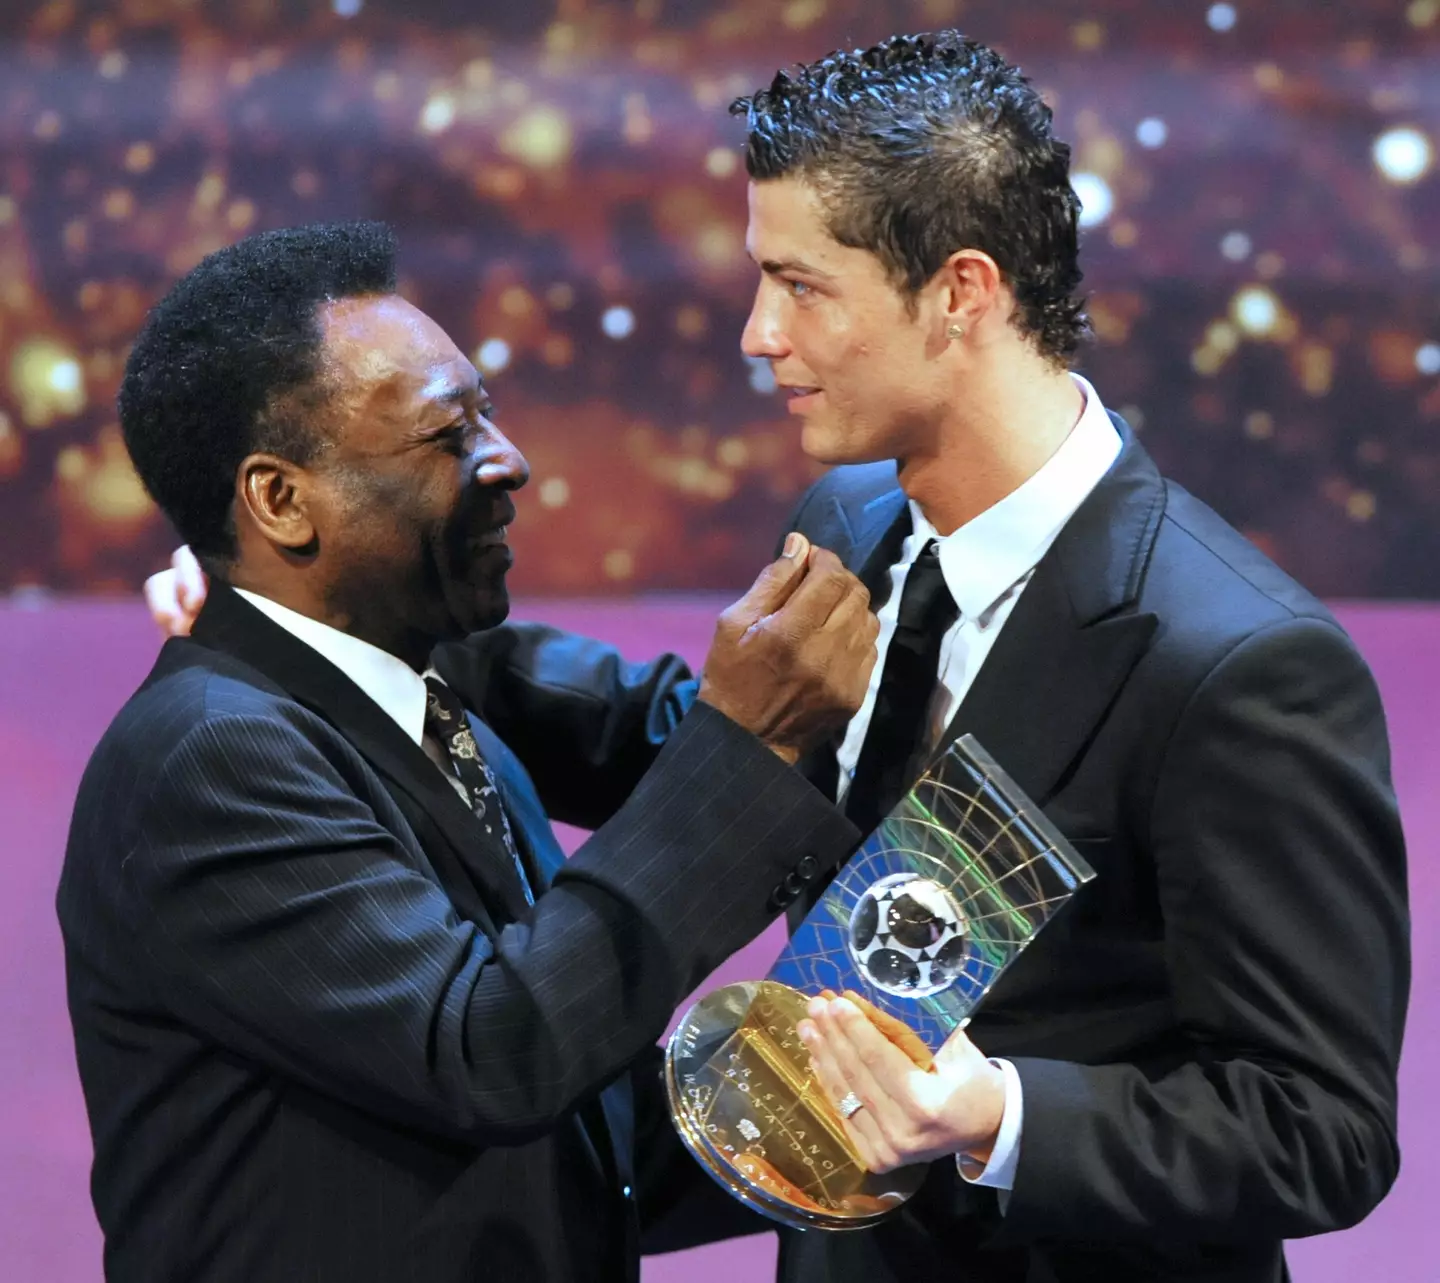 Pele named Cristiano Ronaldo as one of his favourite footballers of all time.